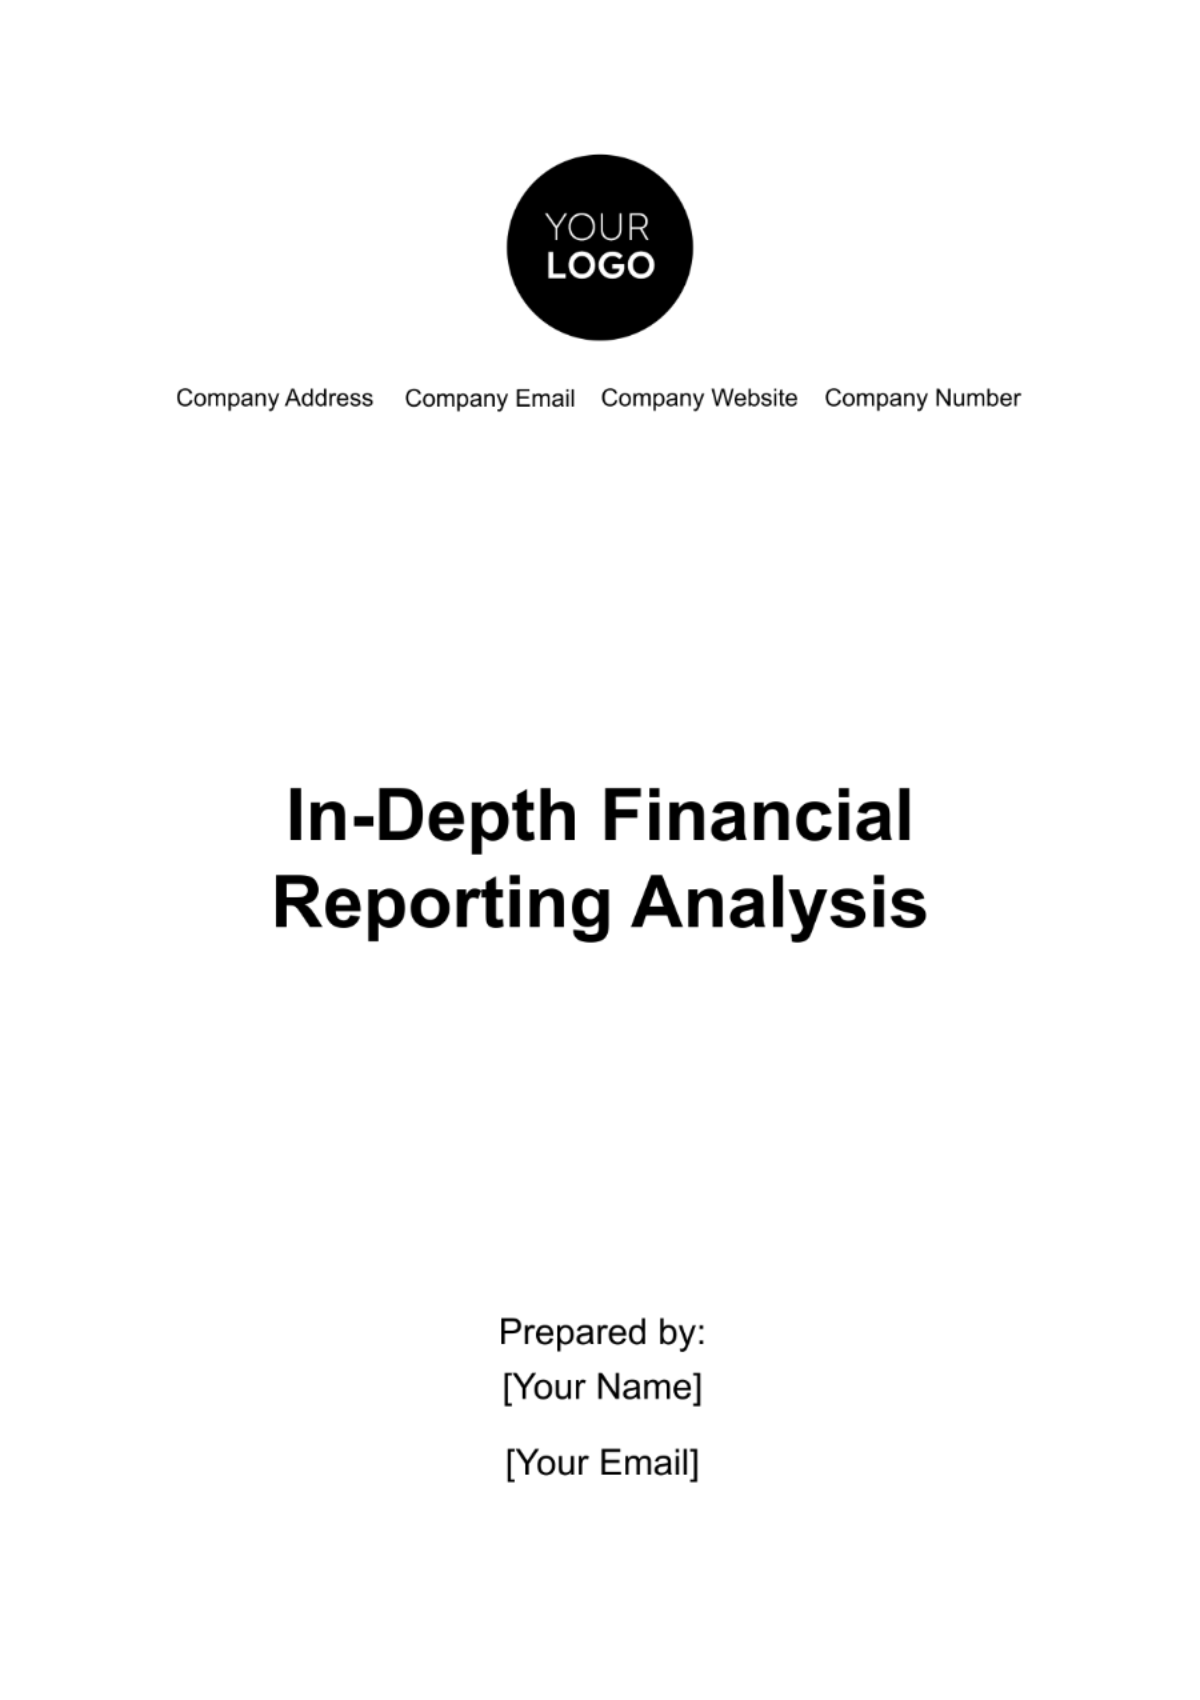 In-Depth Financial Reporting Analysis Template